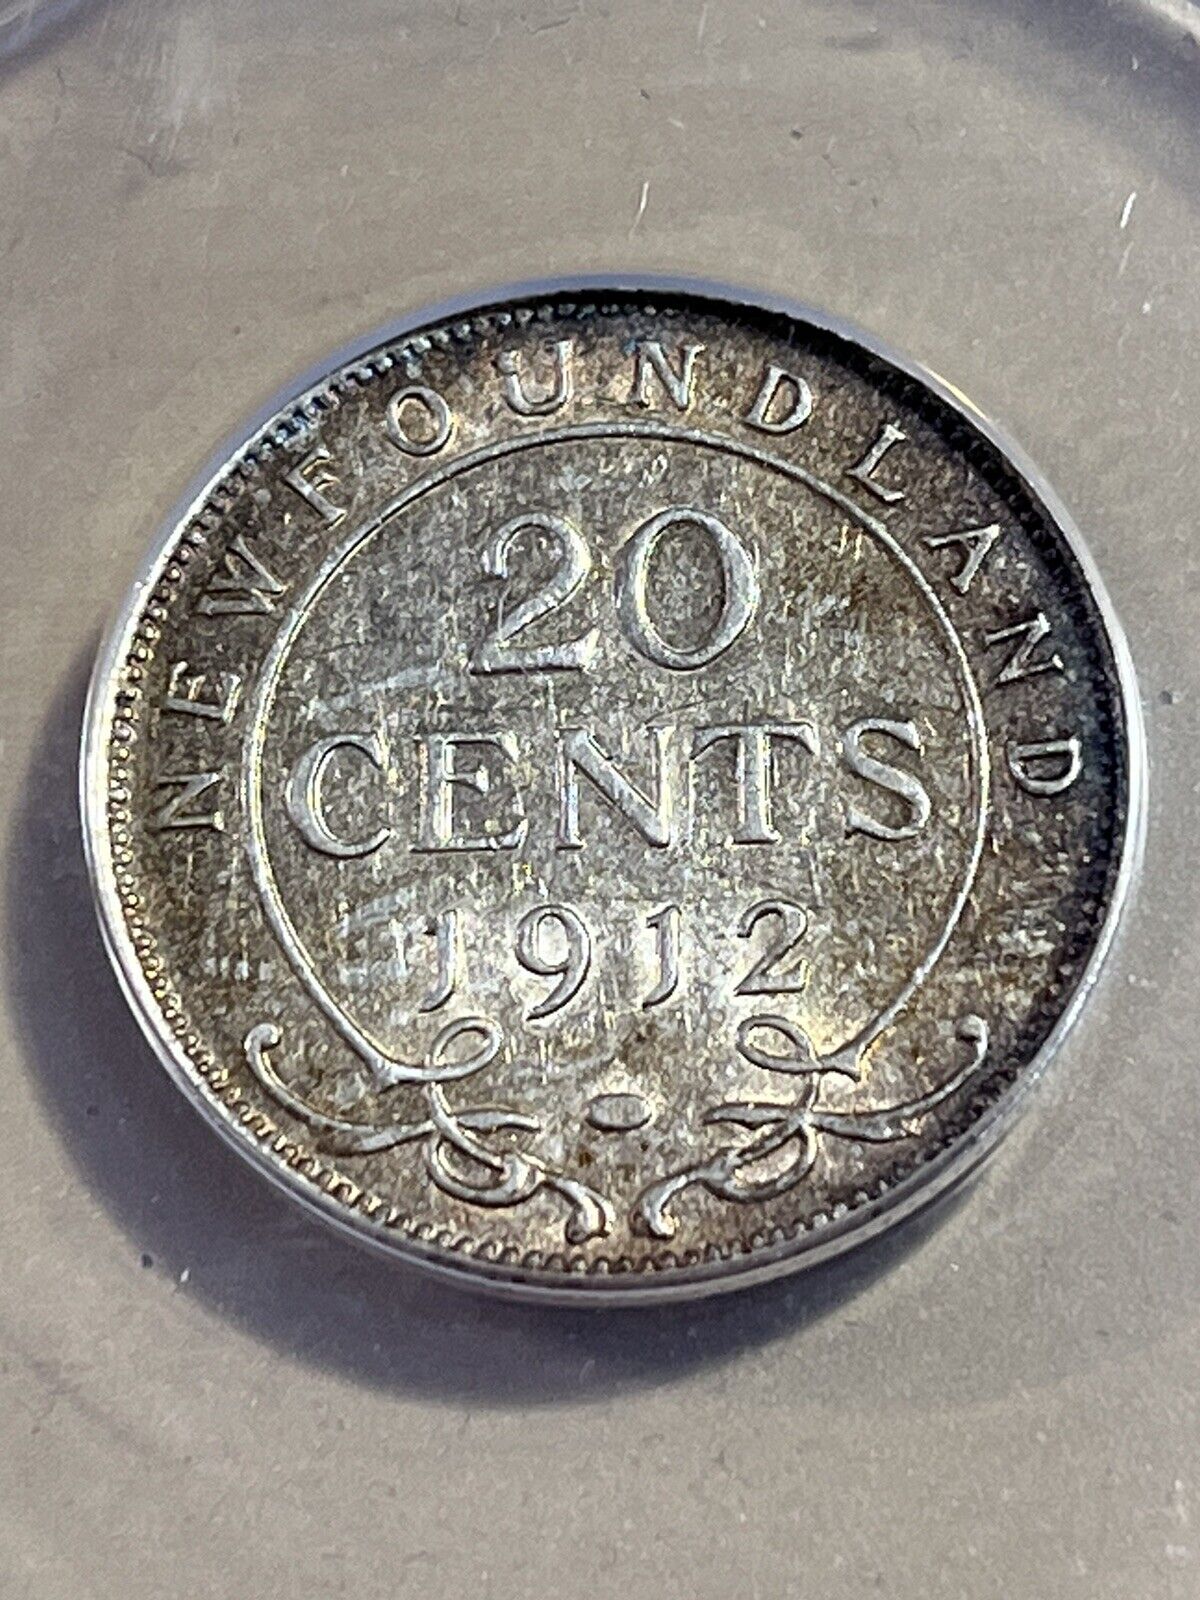 1912 Newfoundland 20 Cents Silver Coin Graded Au50 By Anacs Low Mintage